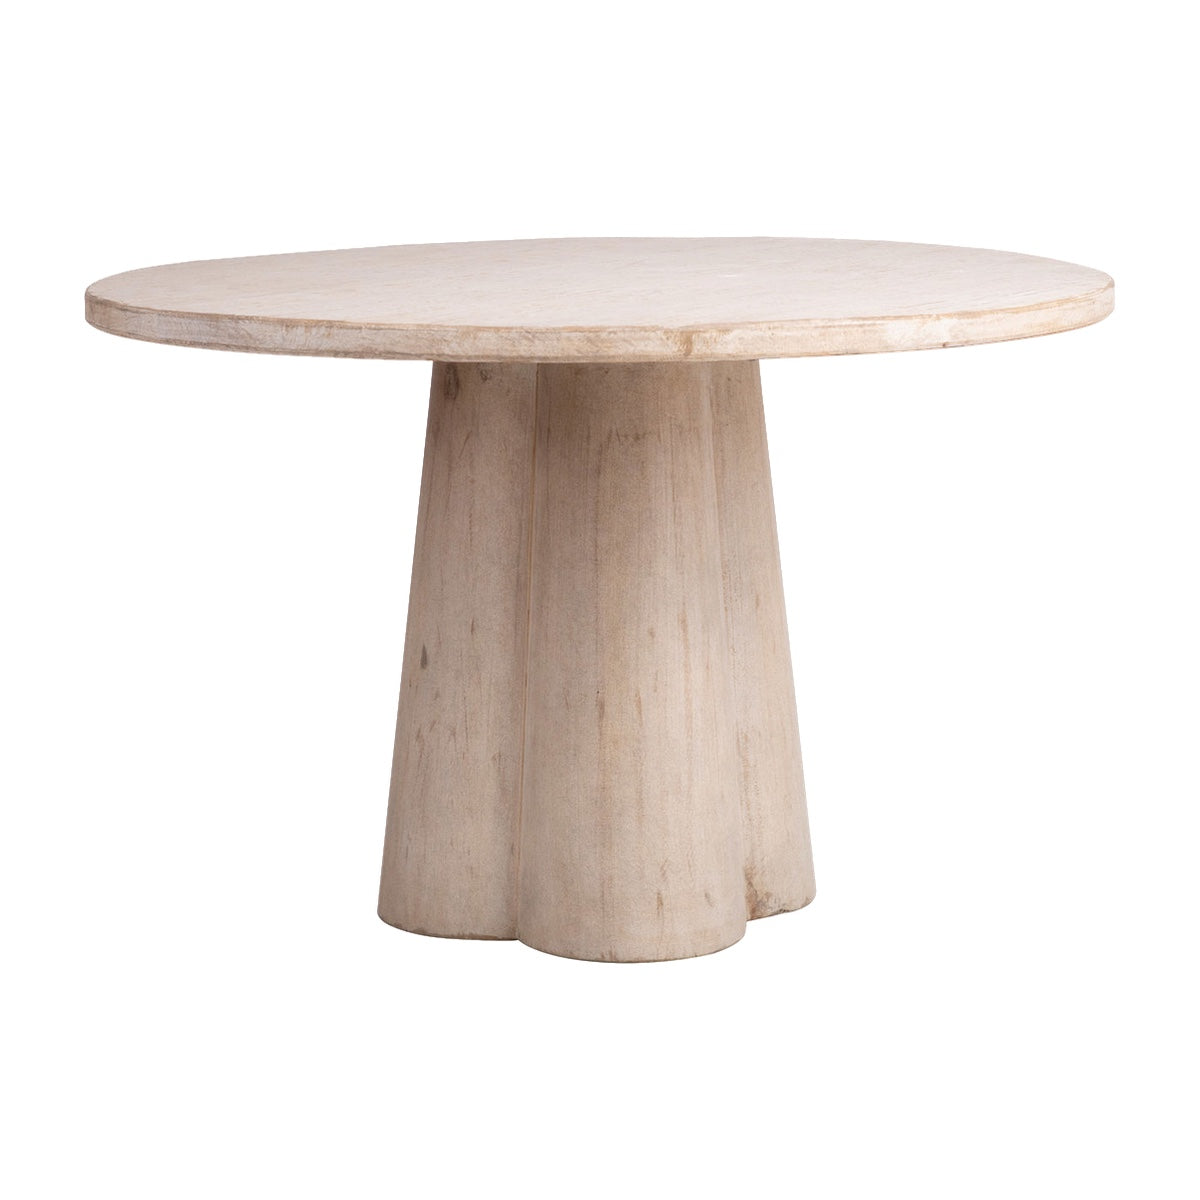 Willow Dining Table - Light Warm Wash